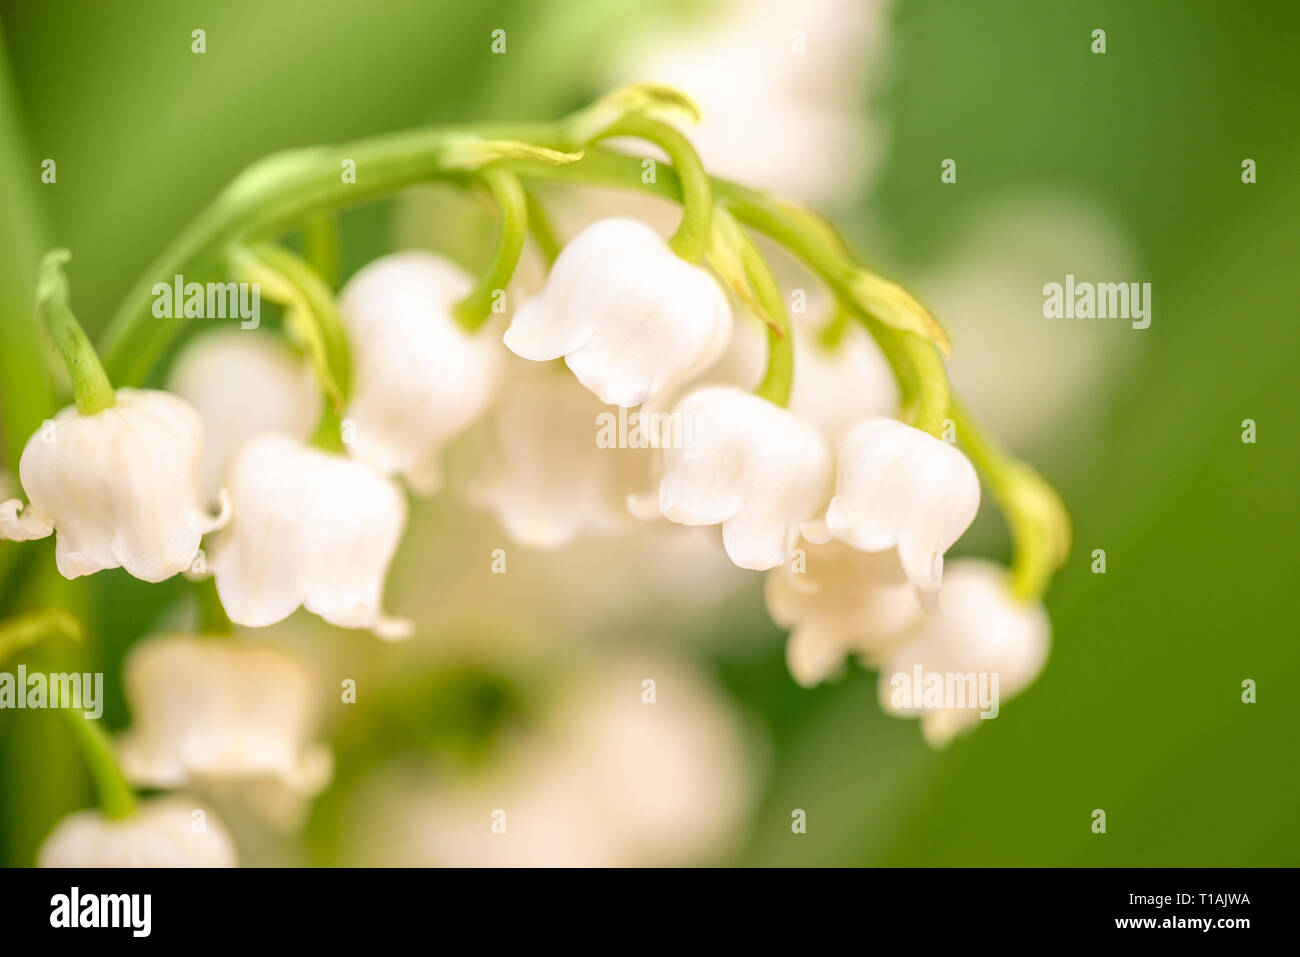 Lily of the valley flower close up, green nature background. May 1st, Labor Day symbol Stock Photo